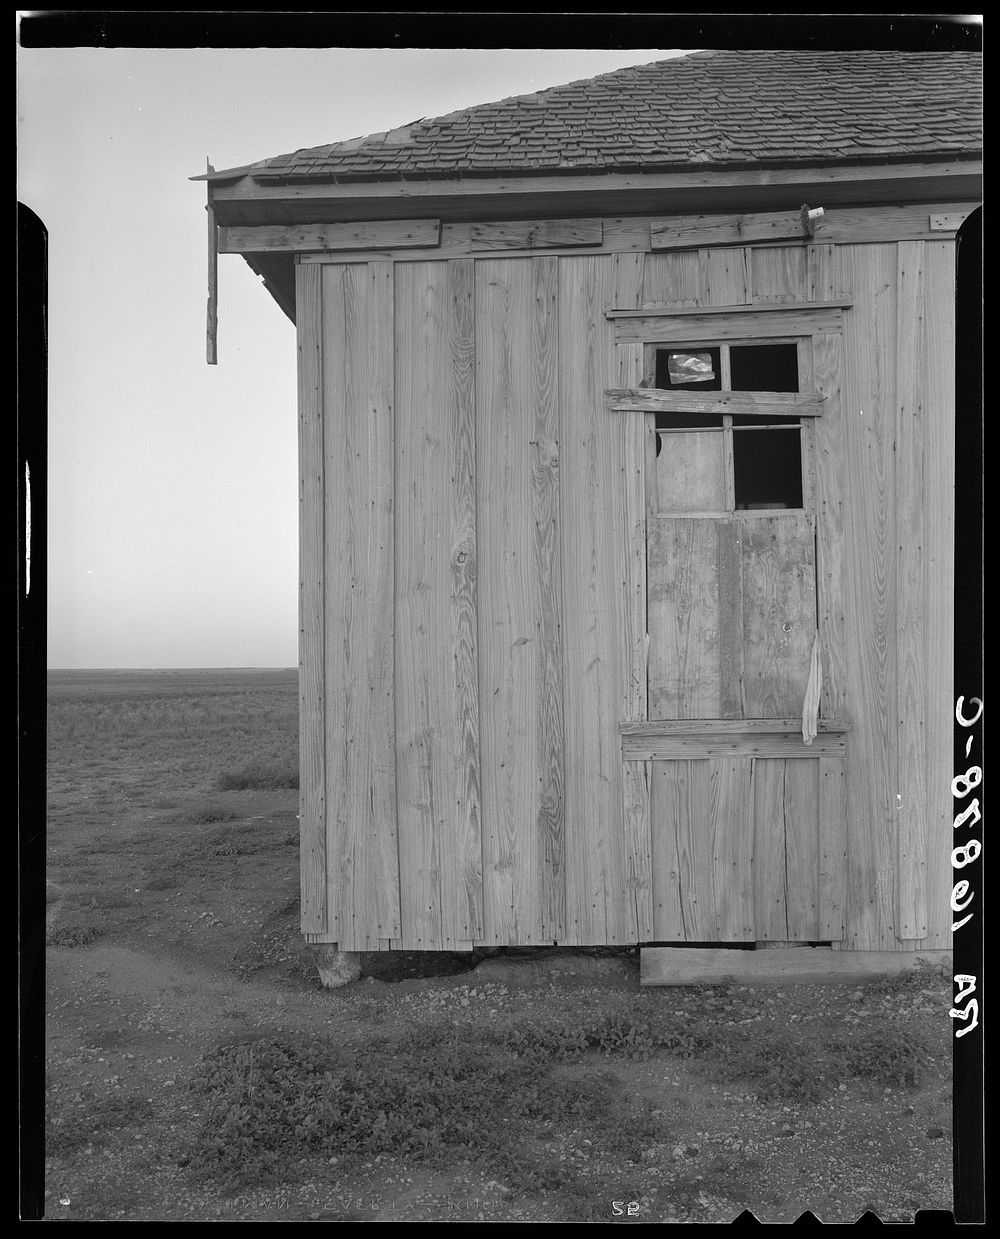 Abandoned tenant house. Childress County, Texas. Sourced from the Library of Congress.